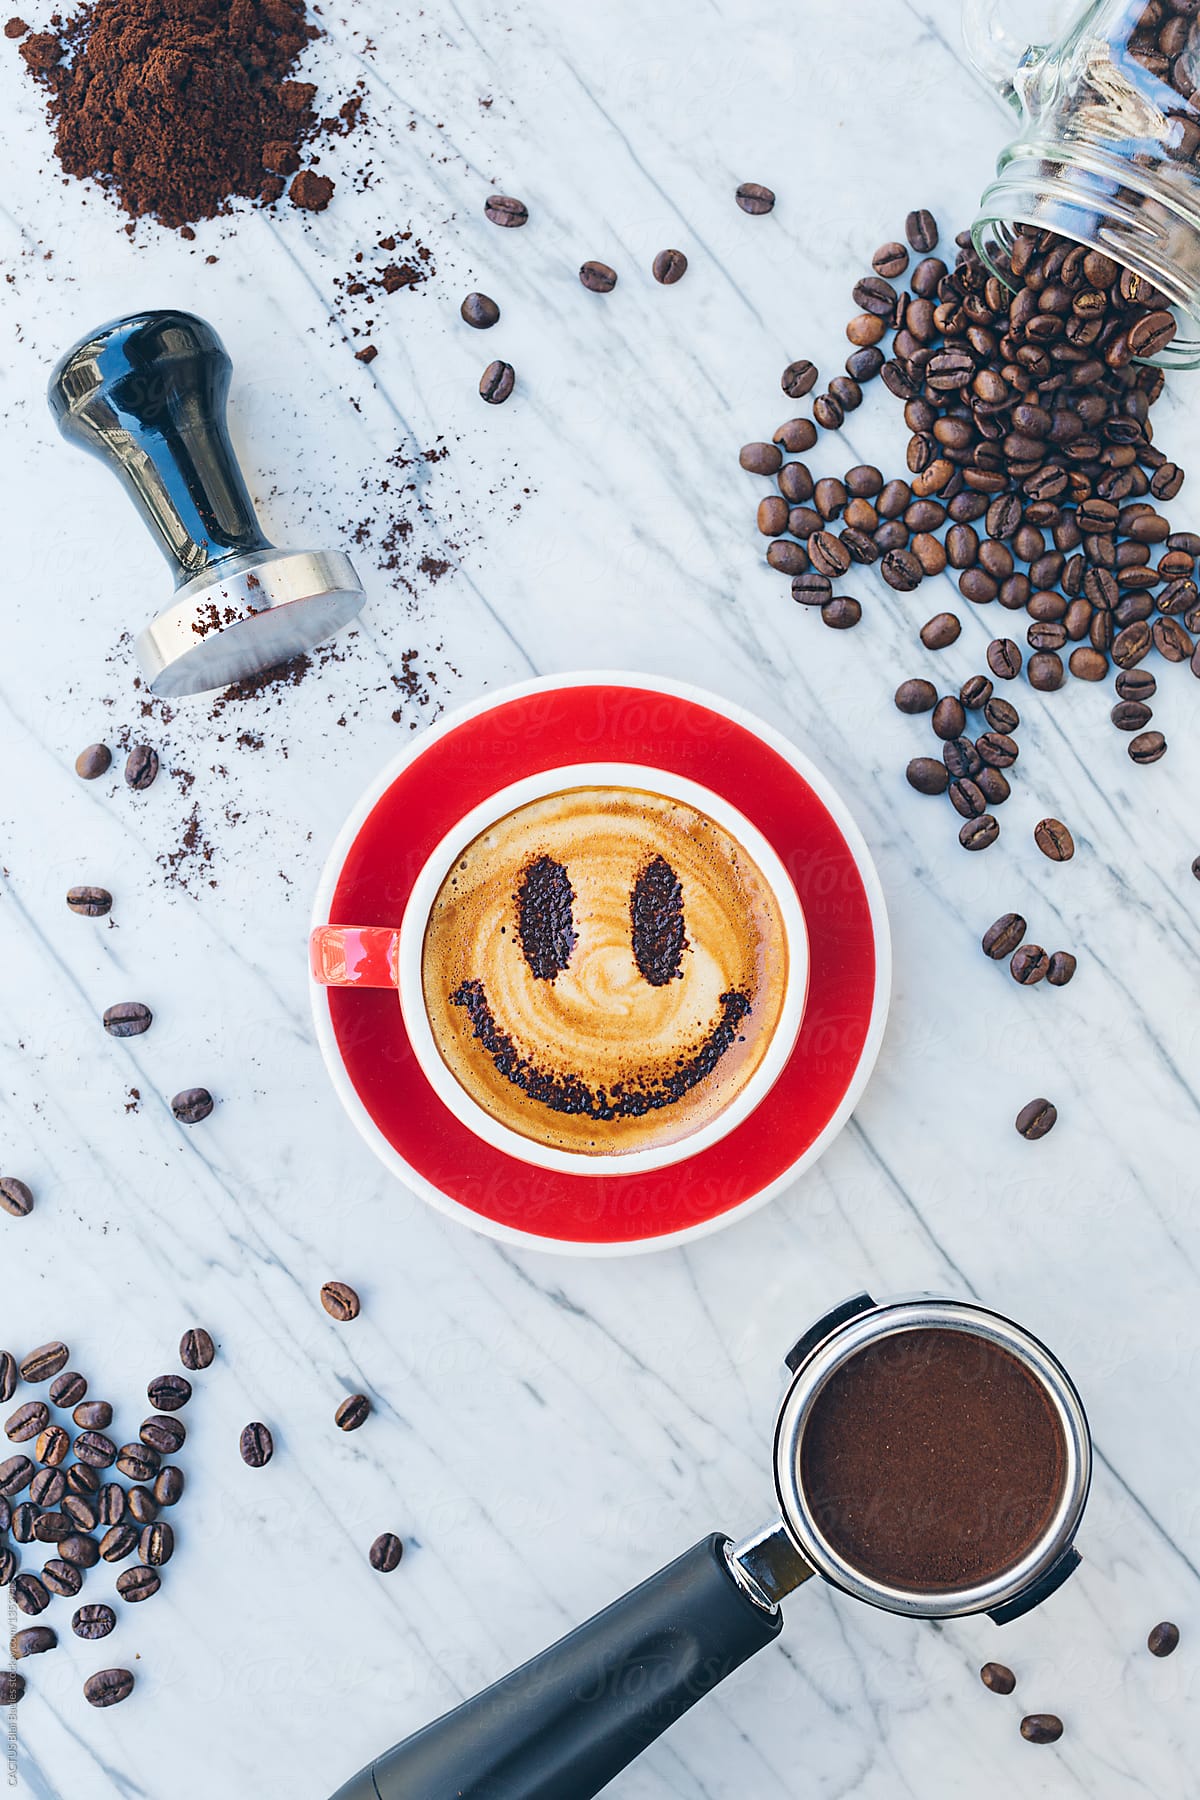 Coffee cup with a smiling face